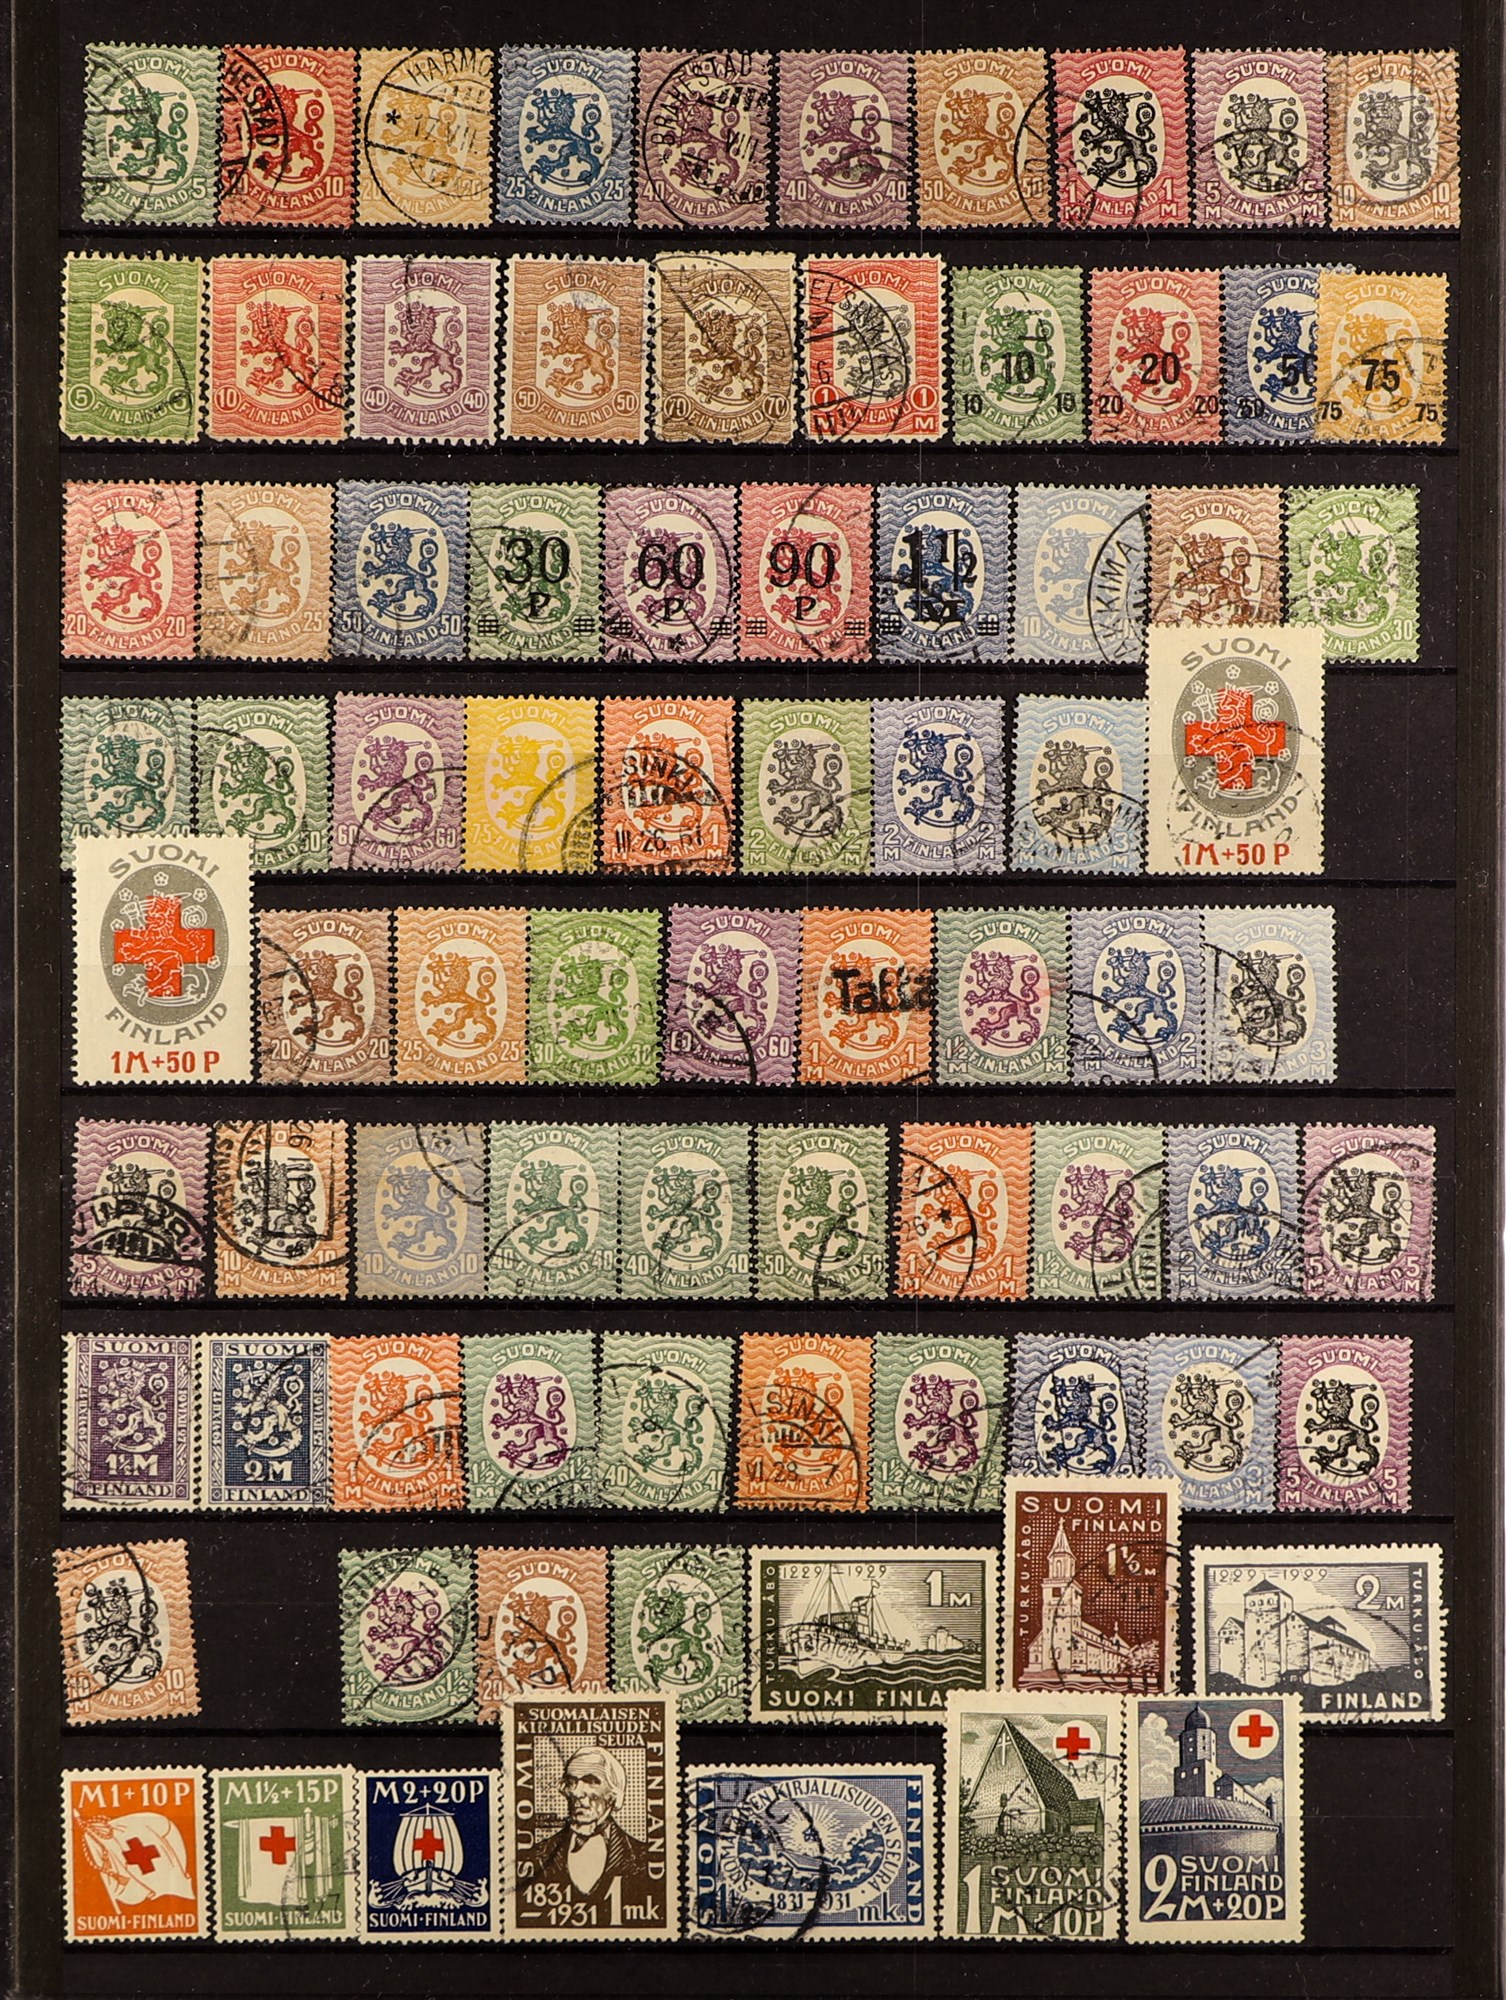 FINLAND 1860 - 2010's ACCUMULATION IN CARTON of mint / never hinged mint & used stamps and miniature - Image 8 of 34